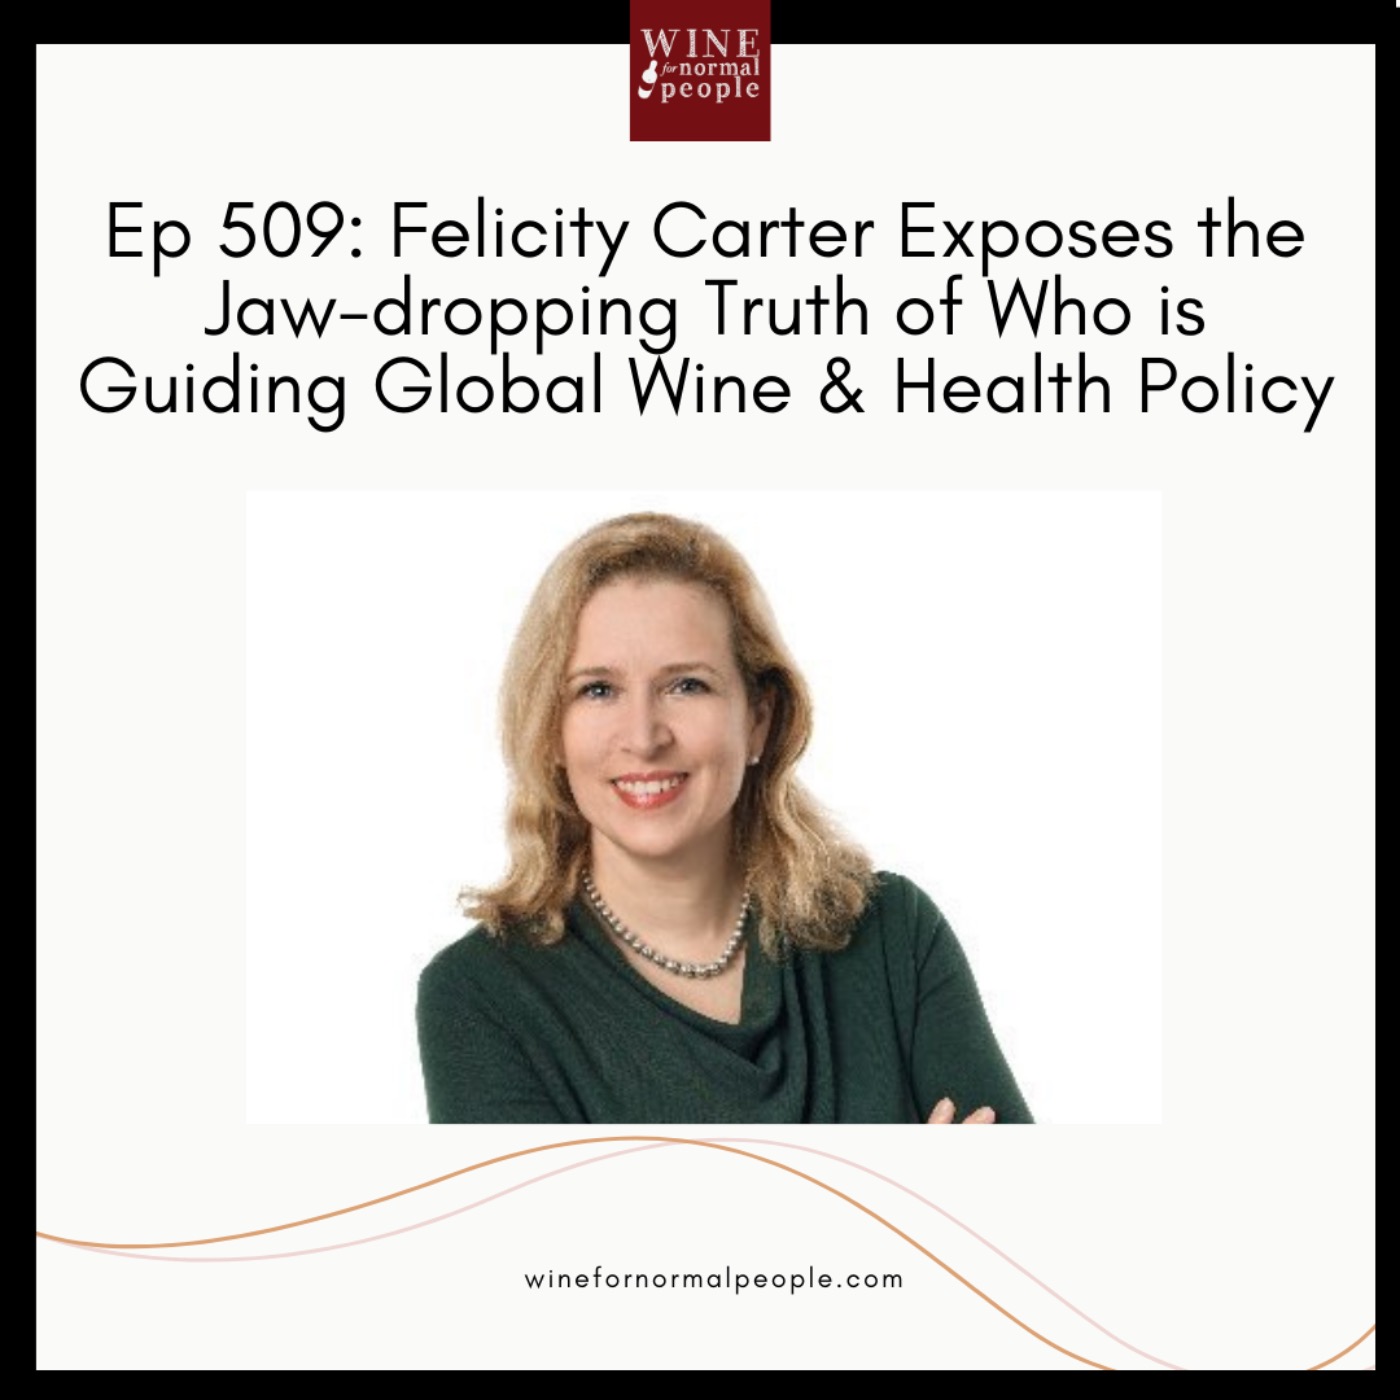 Ep 509: Felicity Carter Exposes the Jaw-dropping Truth of Who is Guiding Global Wine & Health Policy